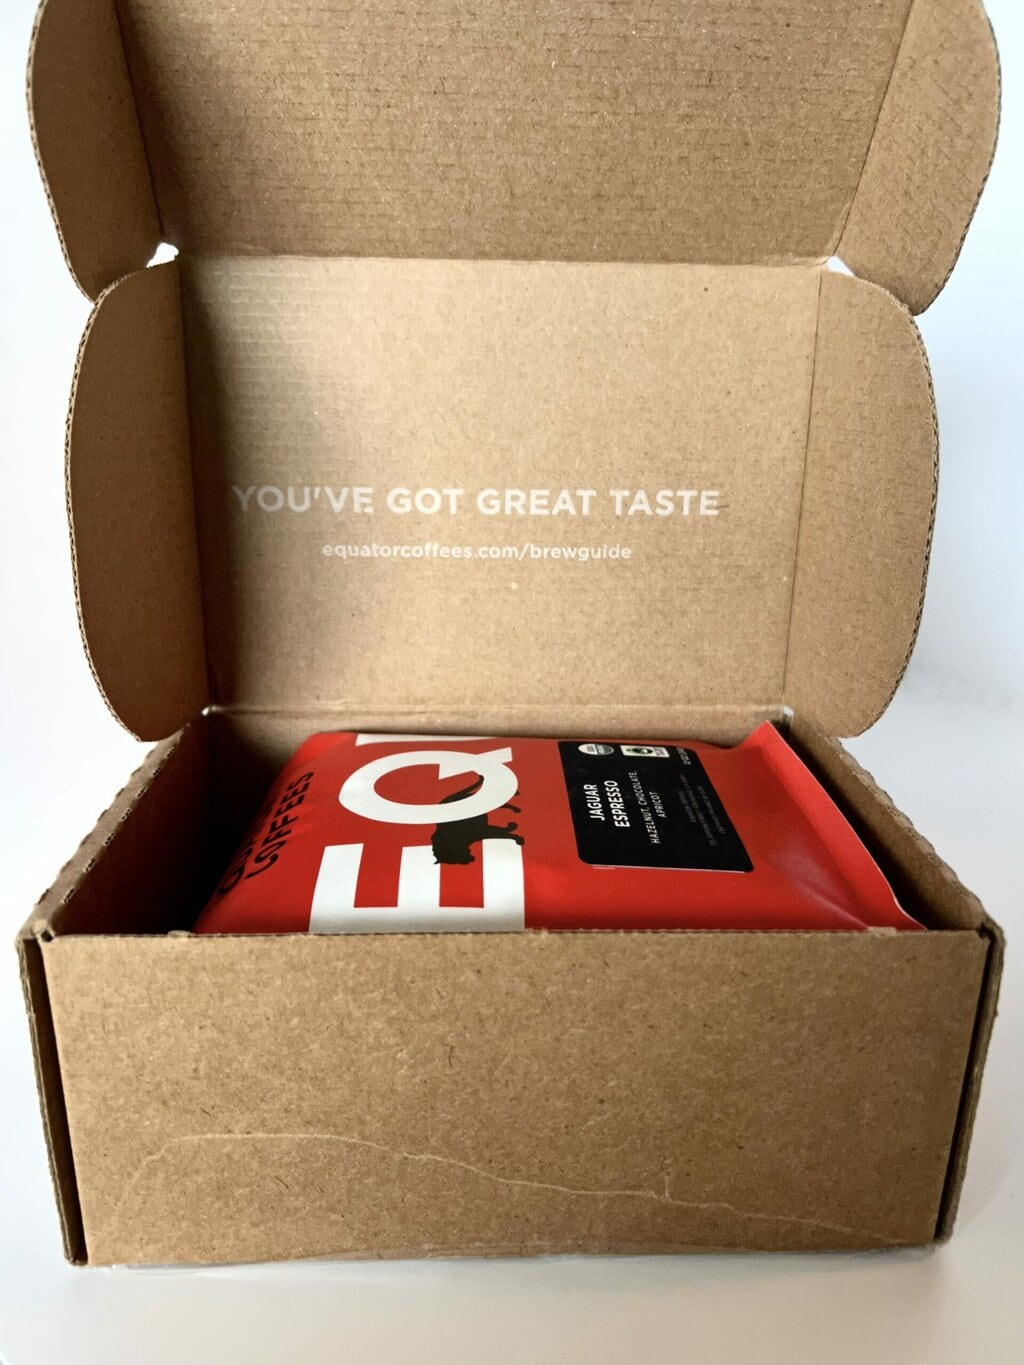 open box with a red pack of Equator Coffees inside